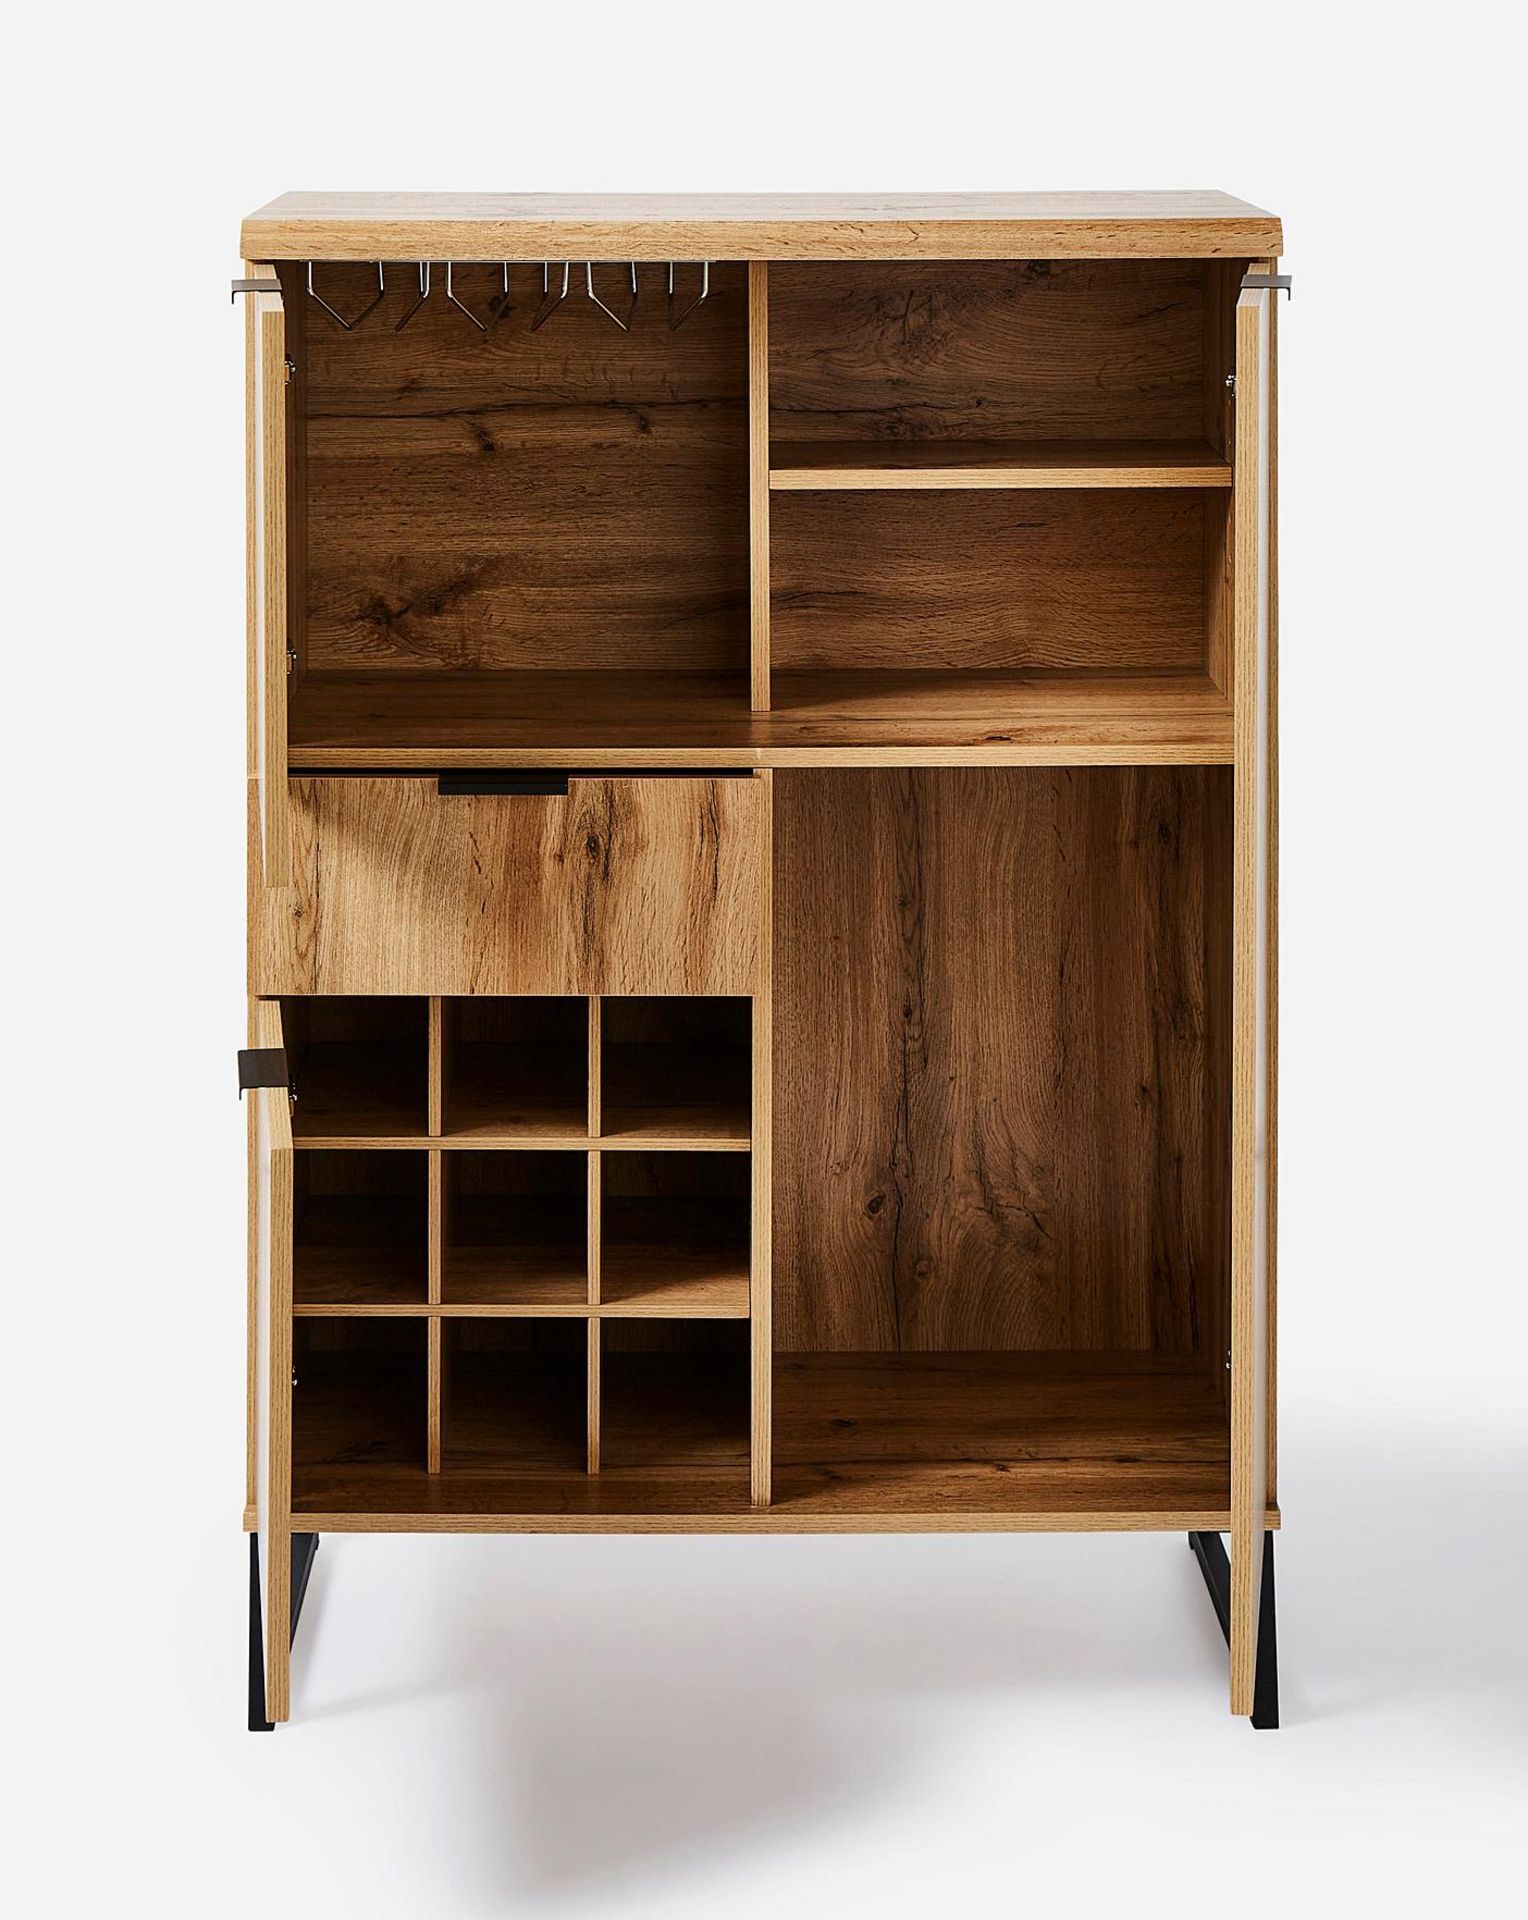 BRAND NEW SHOREDITCH Drinks Cabinet. OAK. RRP £299. The Shoreditch Range is a contemporary and - Image 7 of 8